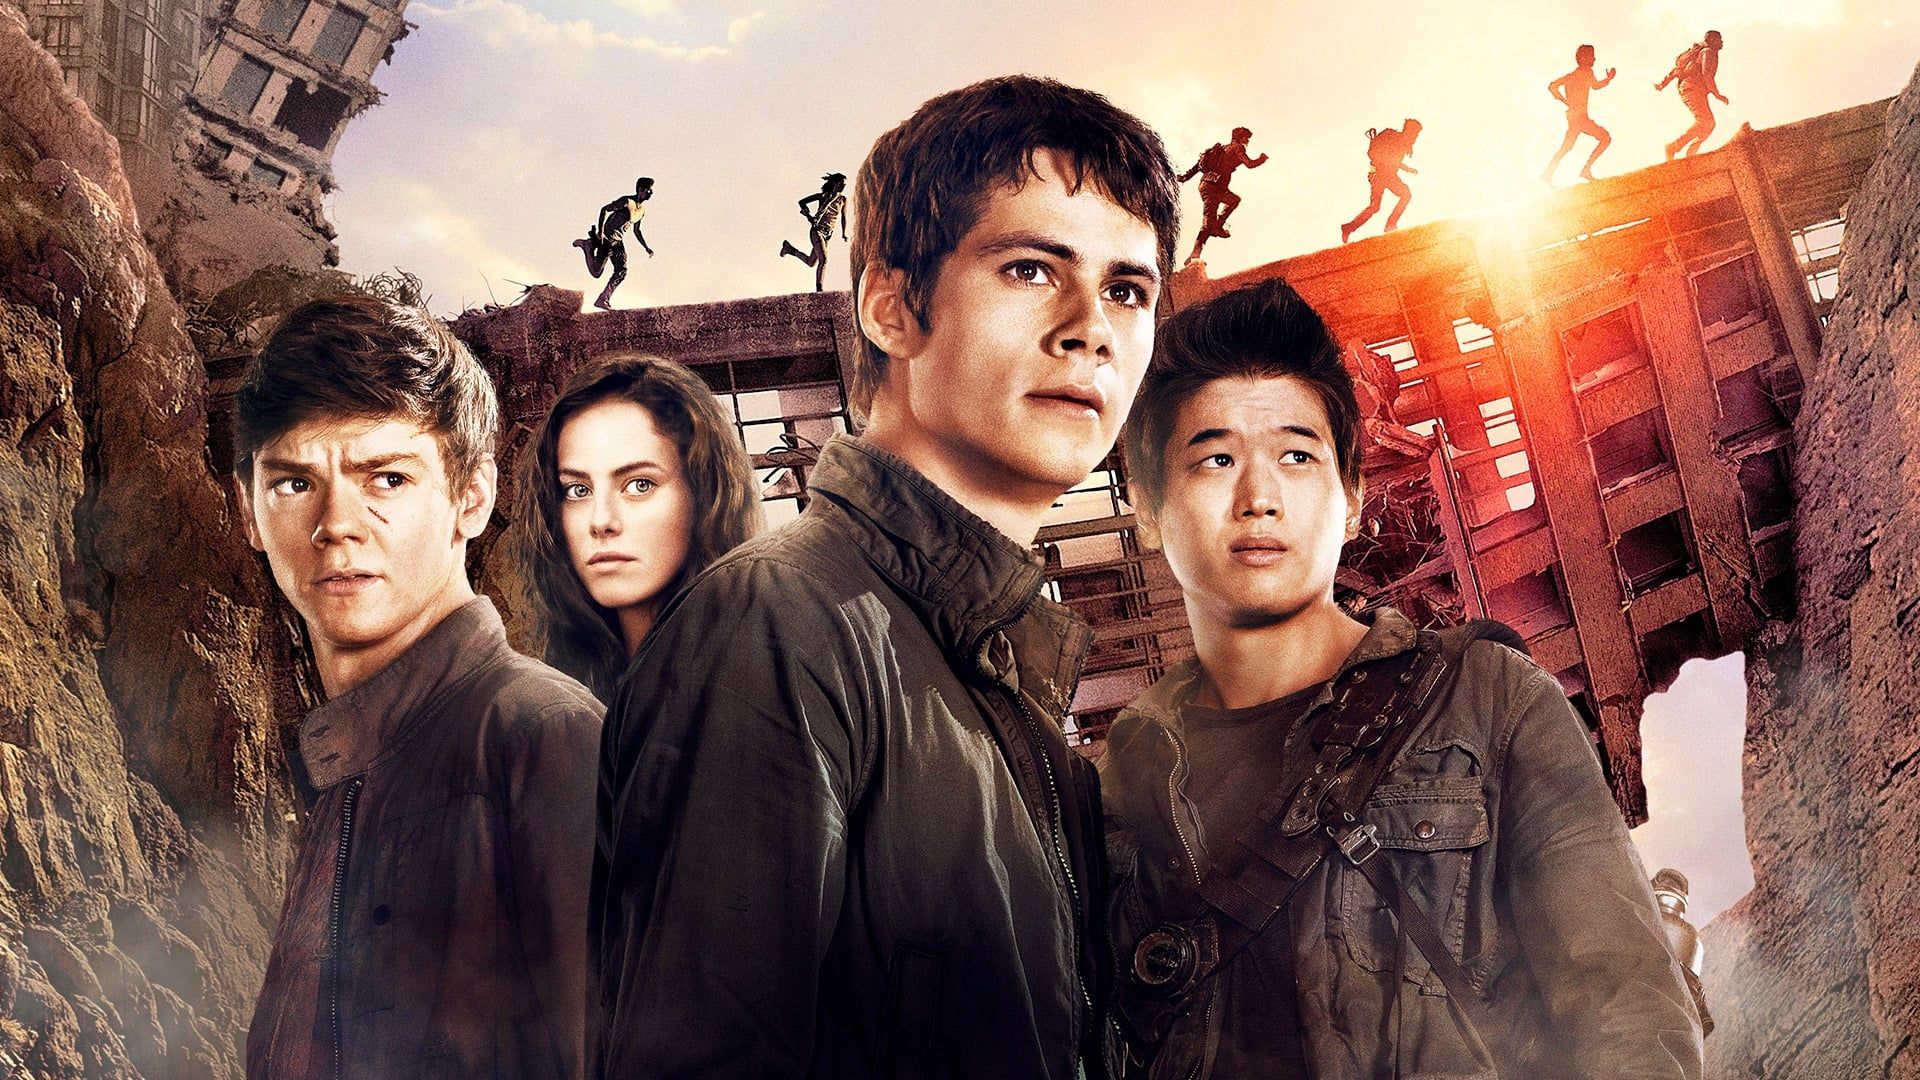 Buy Maze Runner: The Death Cure - Microsoft Store